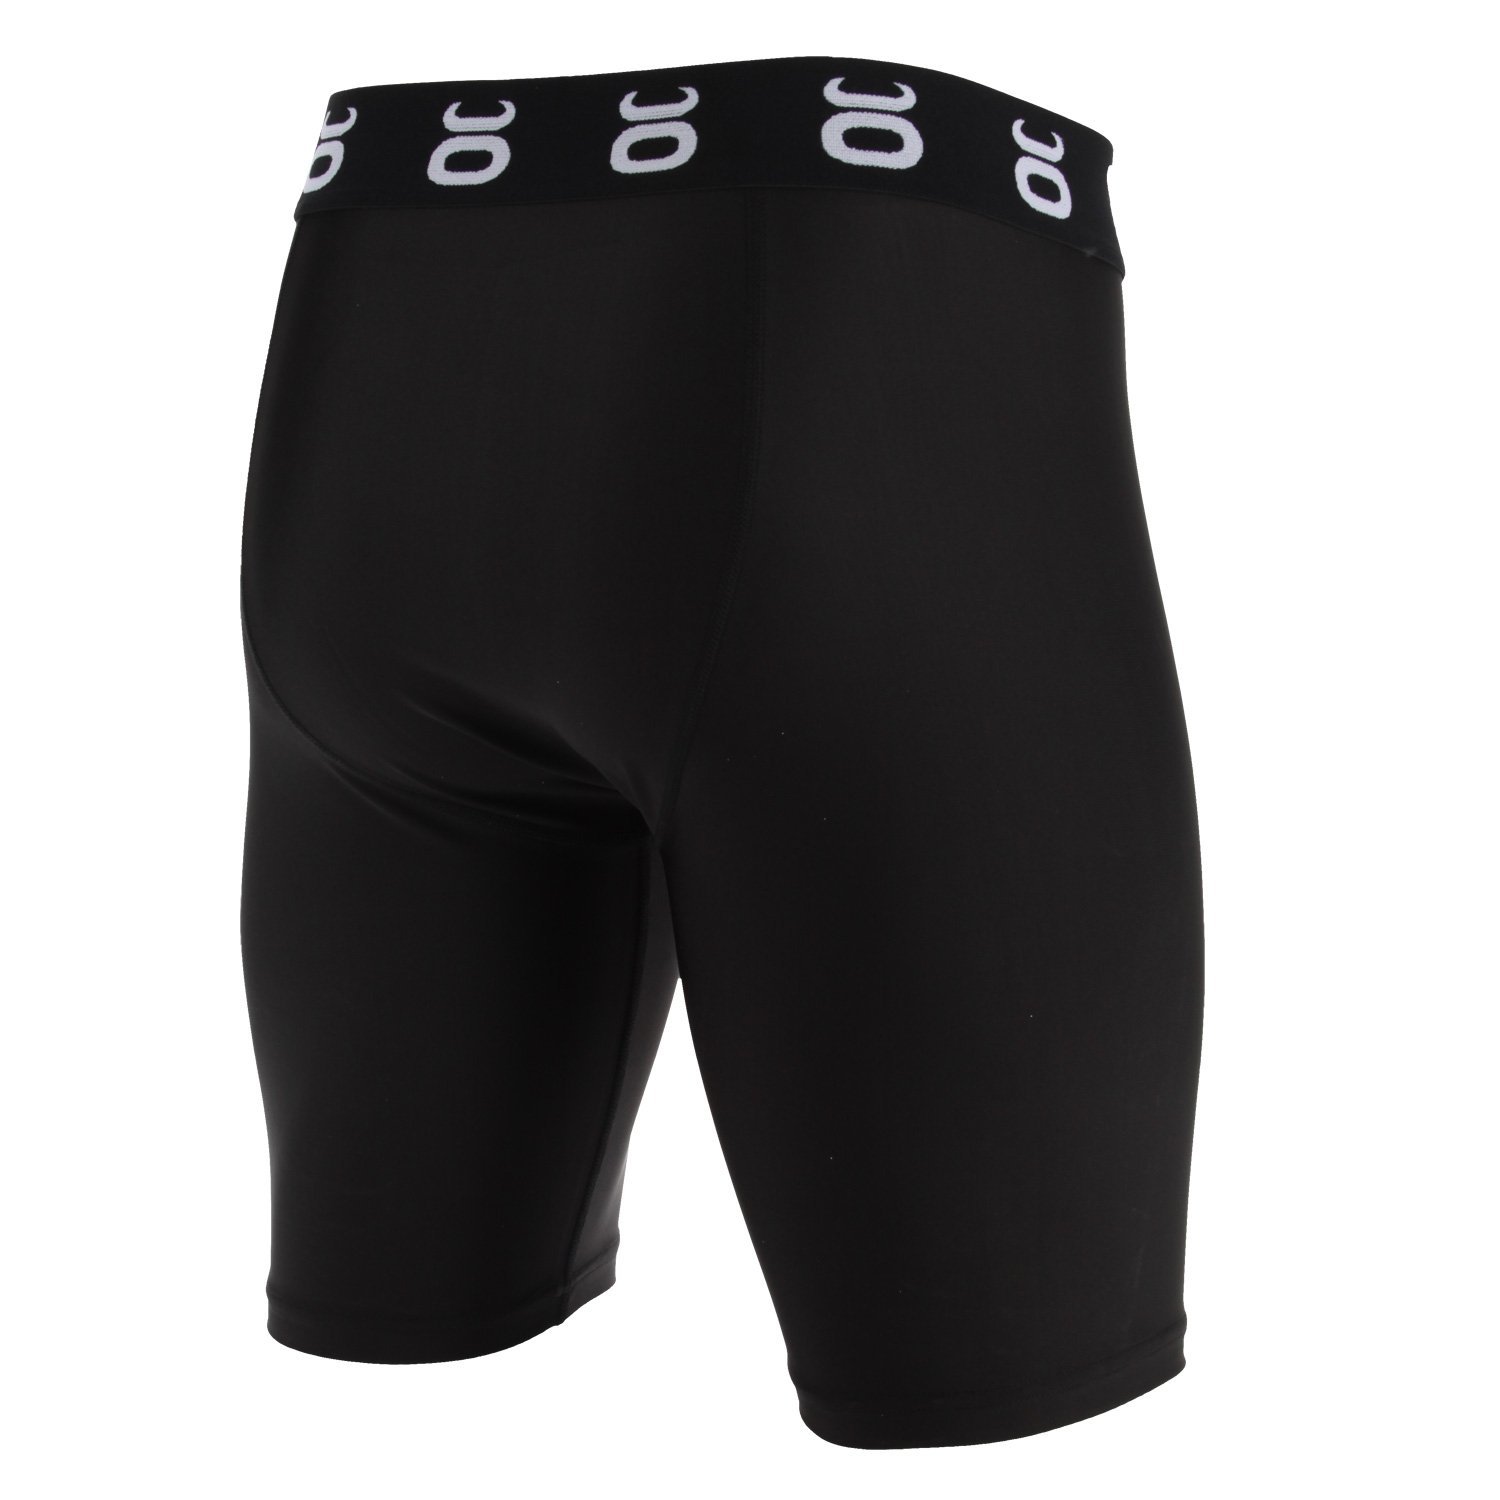 The Best MMA Compression Shorts for Training